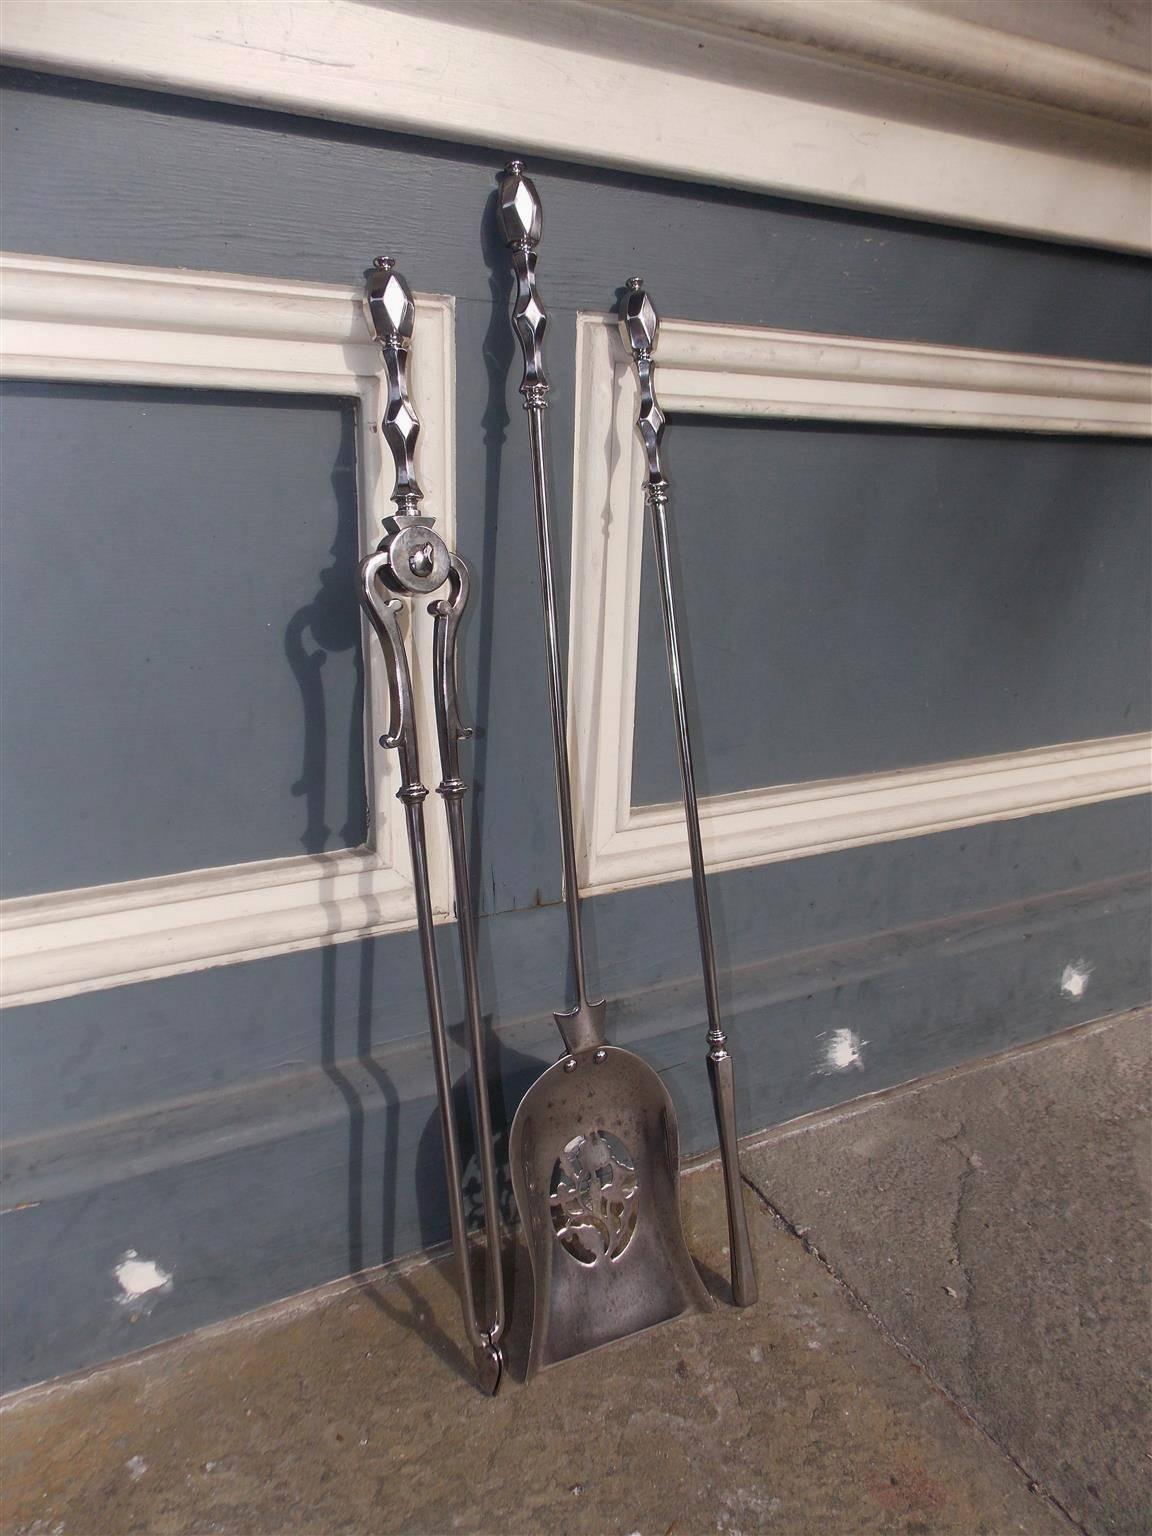 Set of English Regency polished steel fire tools with hand chased faceted diamond handles, turned bulbous ringed columns and a decorative pierced floral shovel. Set consist of shovel, tong and poker, Late 18th century.